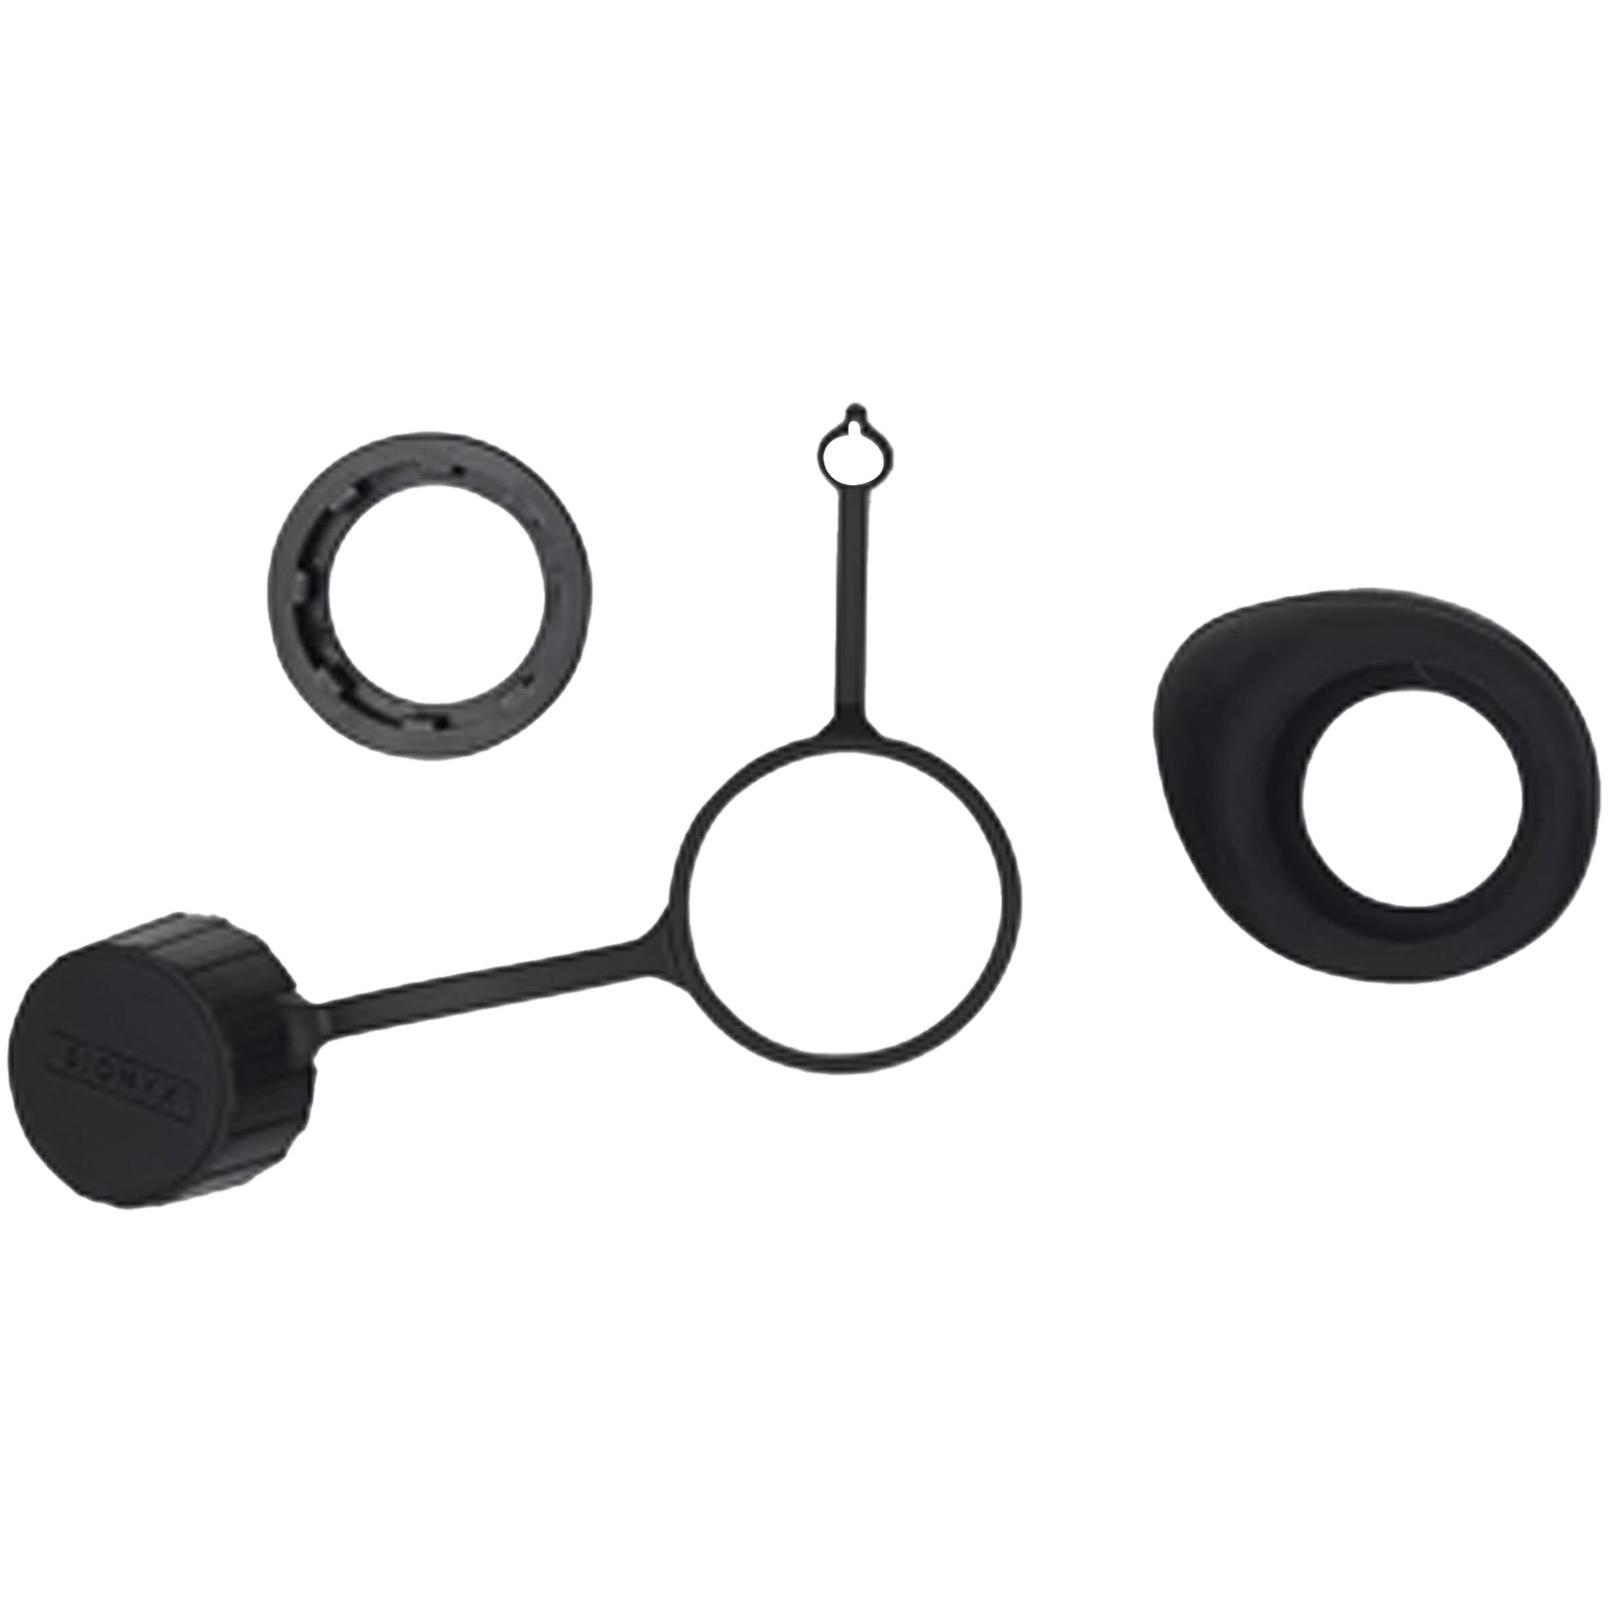 Sionyx - Opsin: Rubber Part Kit